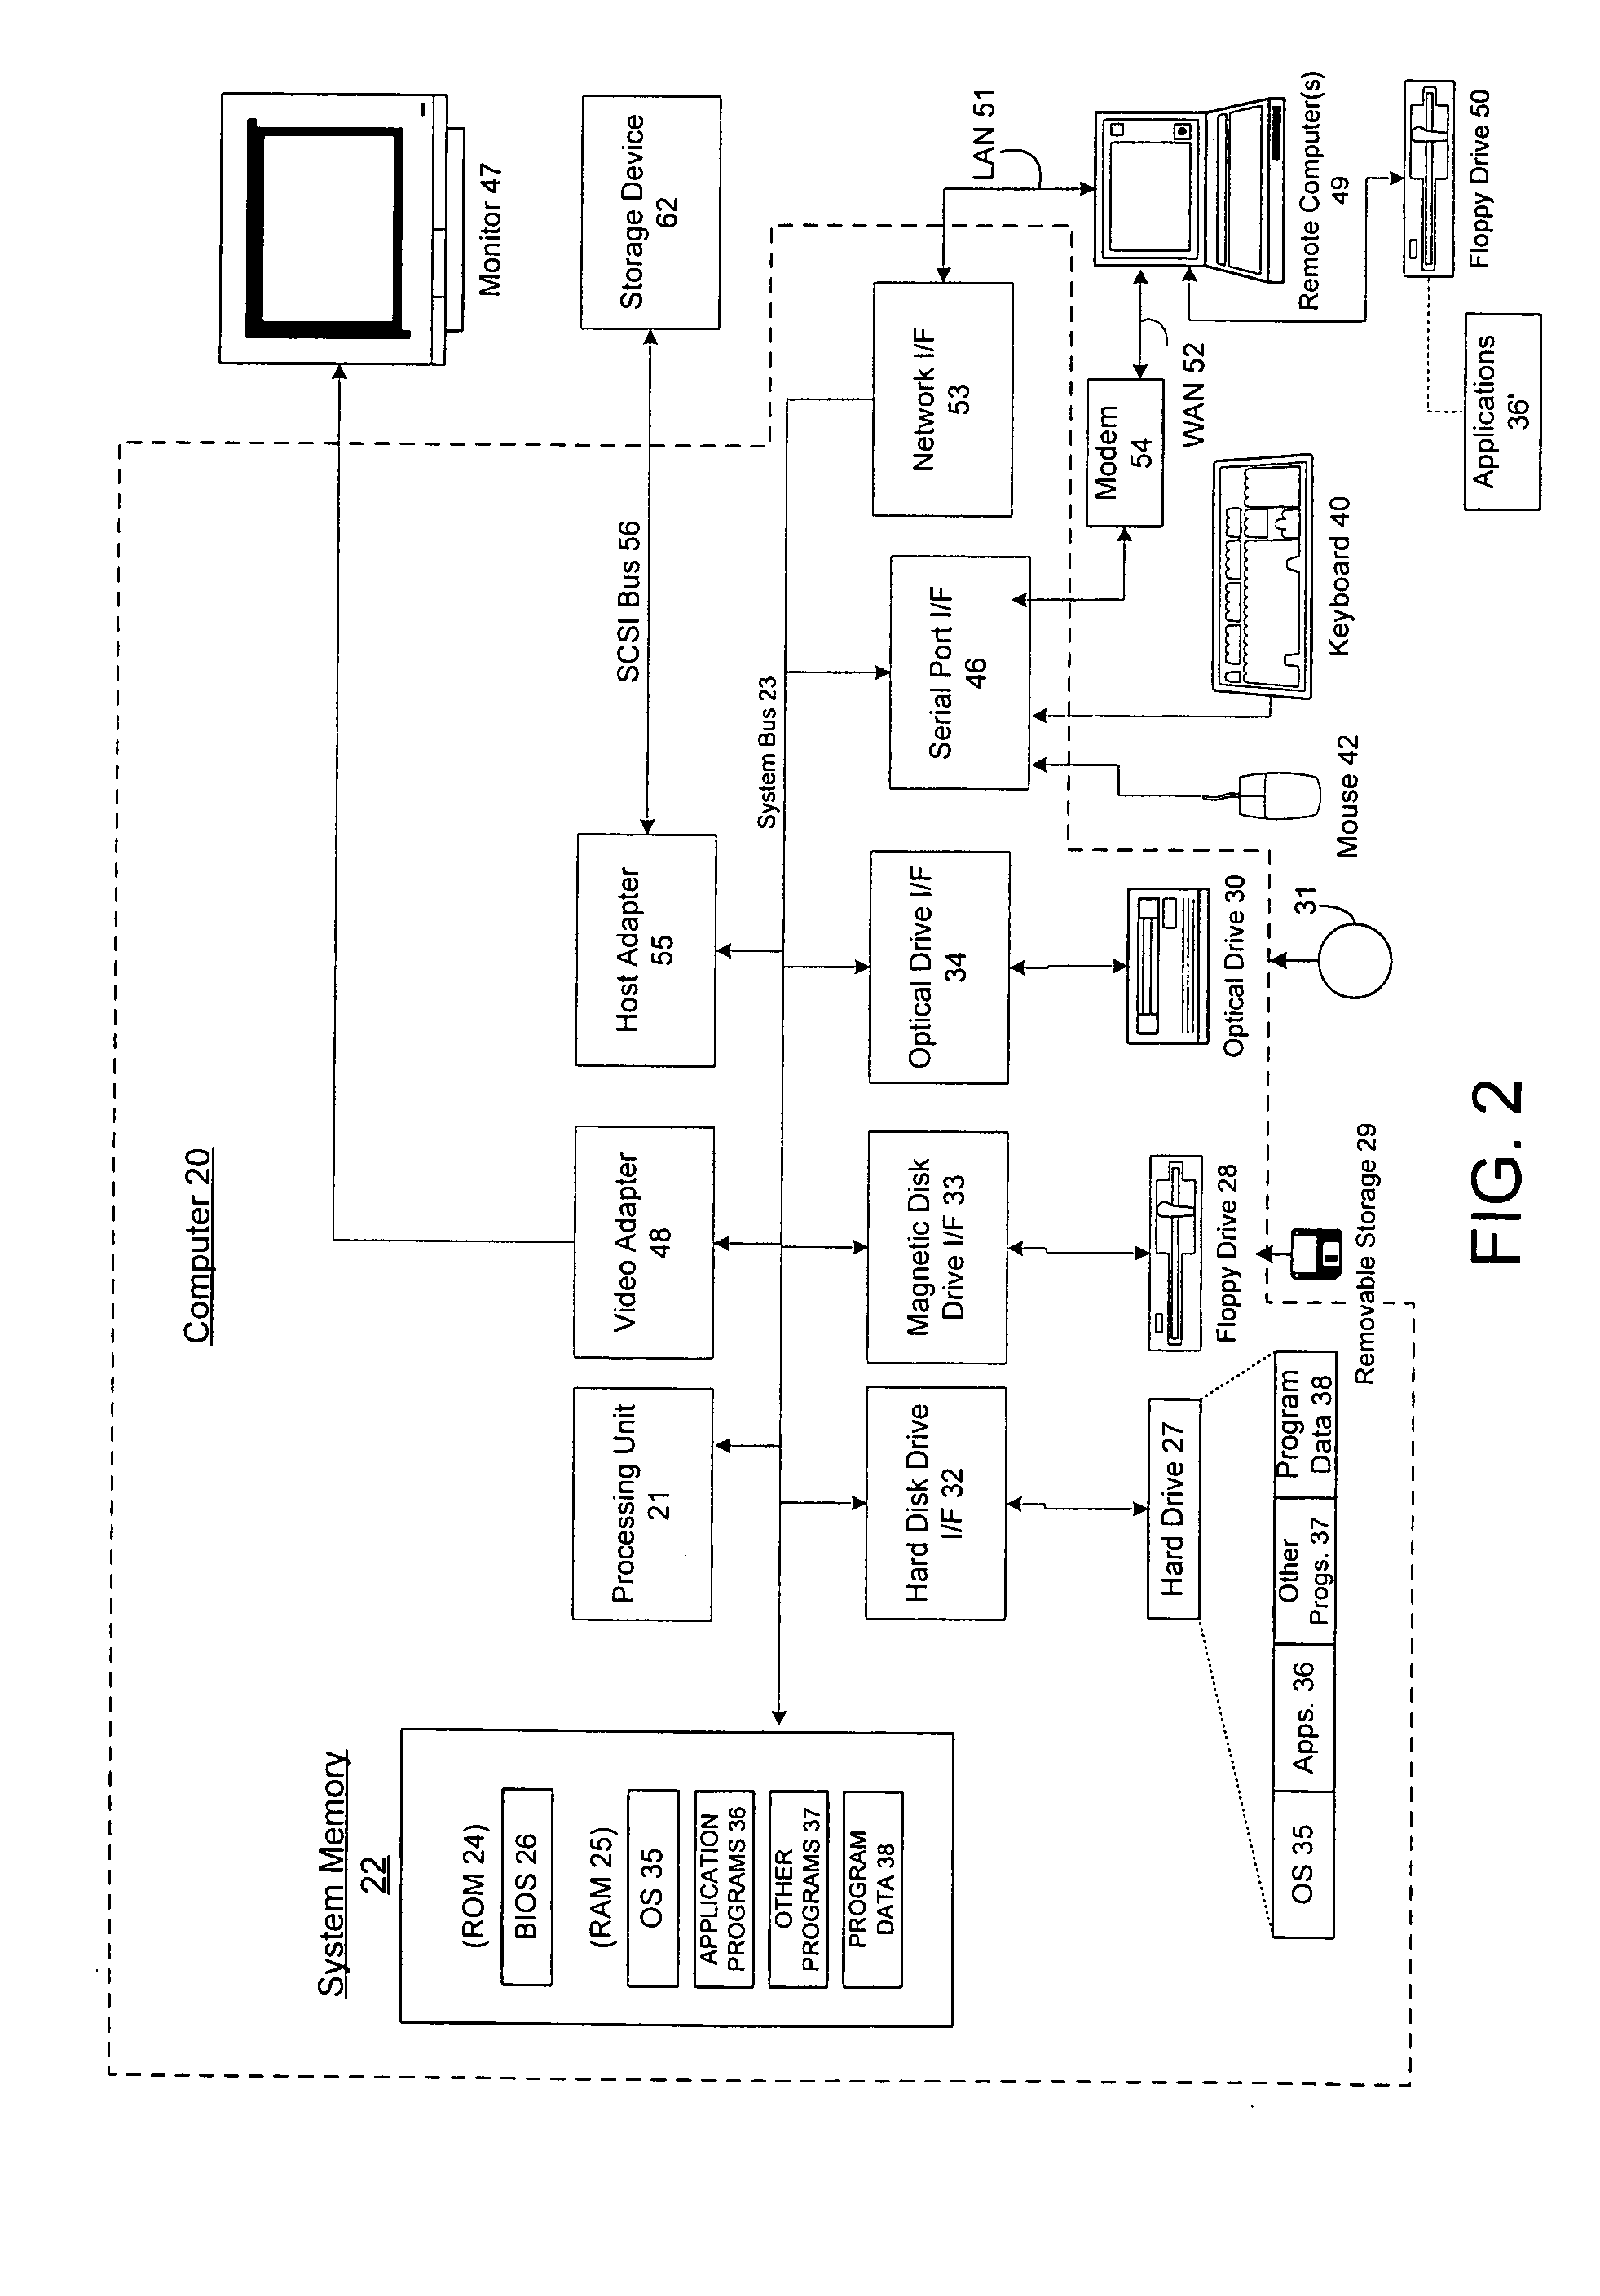 Method and system for limiting the use of user-specific software features